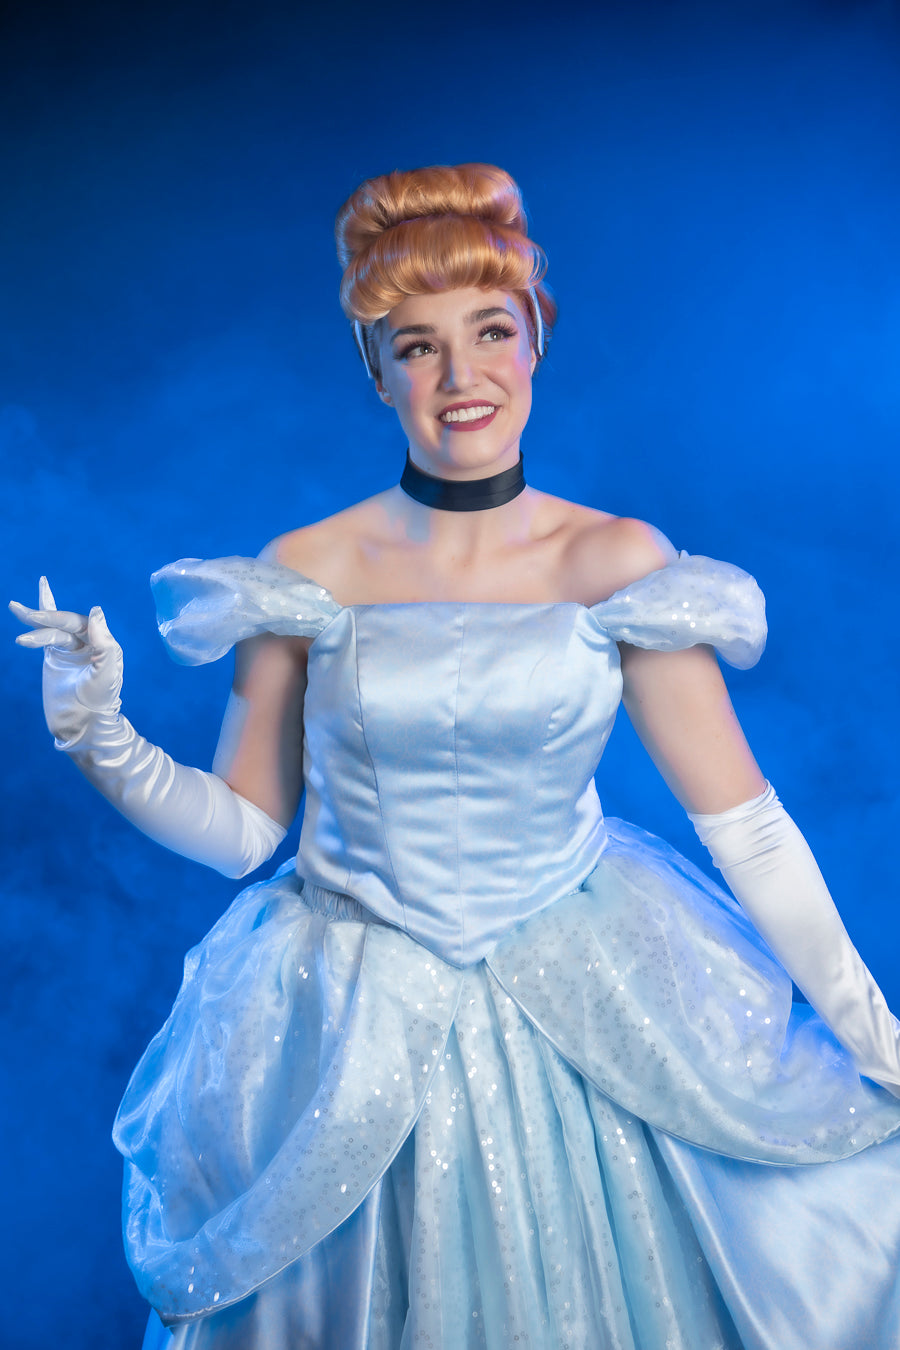 Cinderella inspired by the Disney classic animated film Costume Hire or Cosplay, plus Makeup and Photography. Proudly by and available at, Little Shop of Horrors Costumery 6/1 Watt Rd Mornington & Melbourne